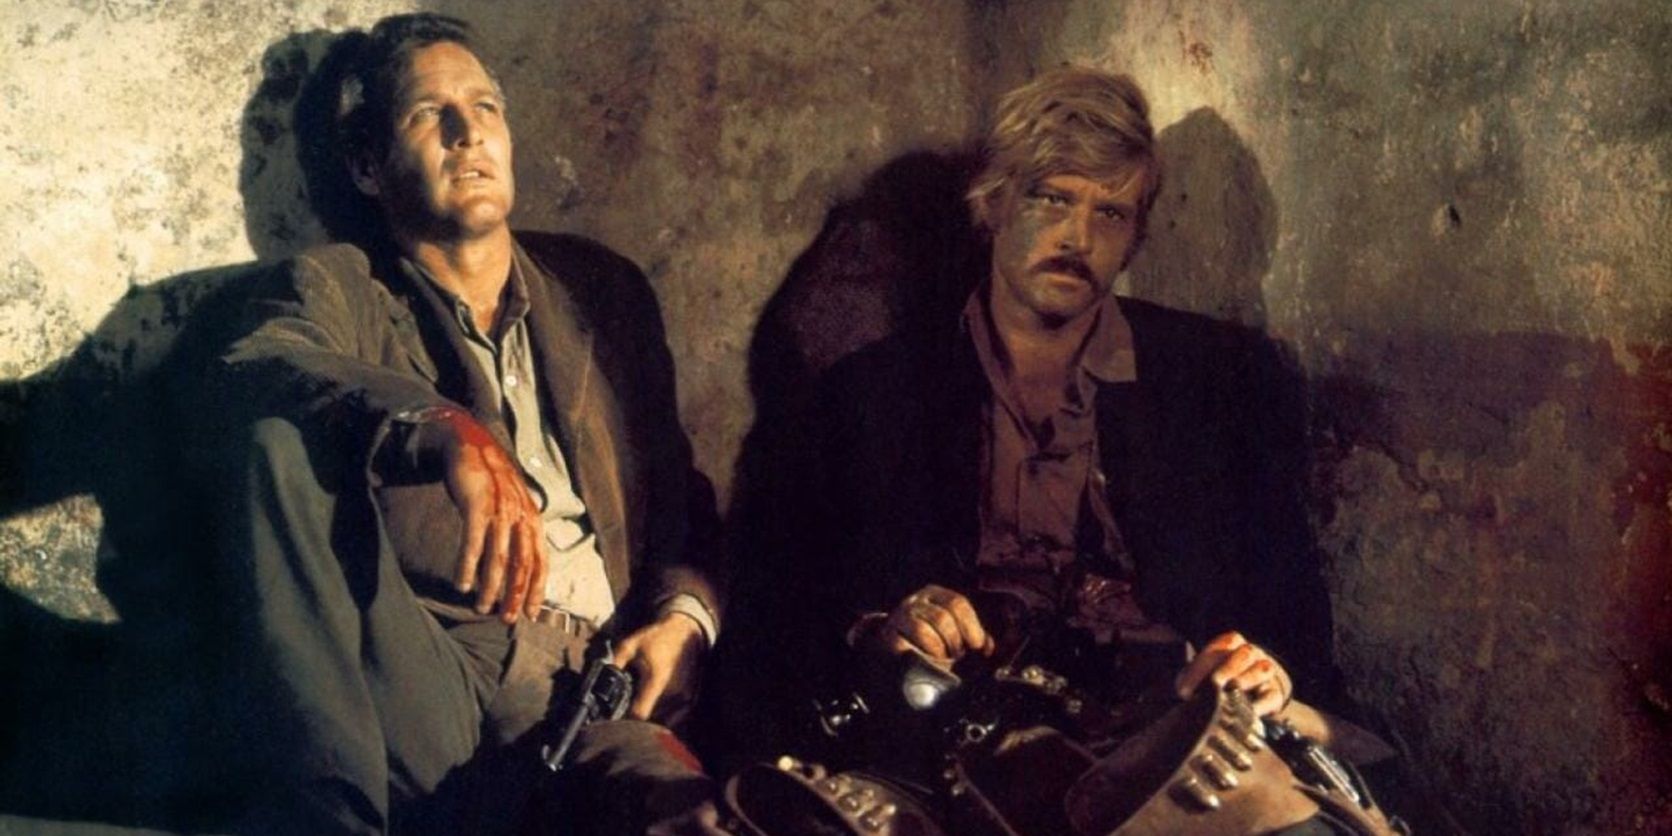 Butch and Sundance take cover in Butch Cassidy and the Sundance Kid